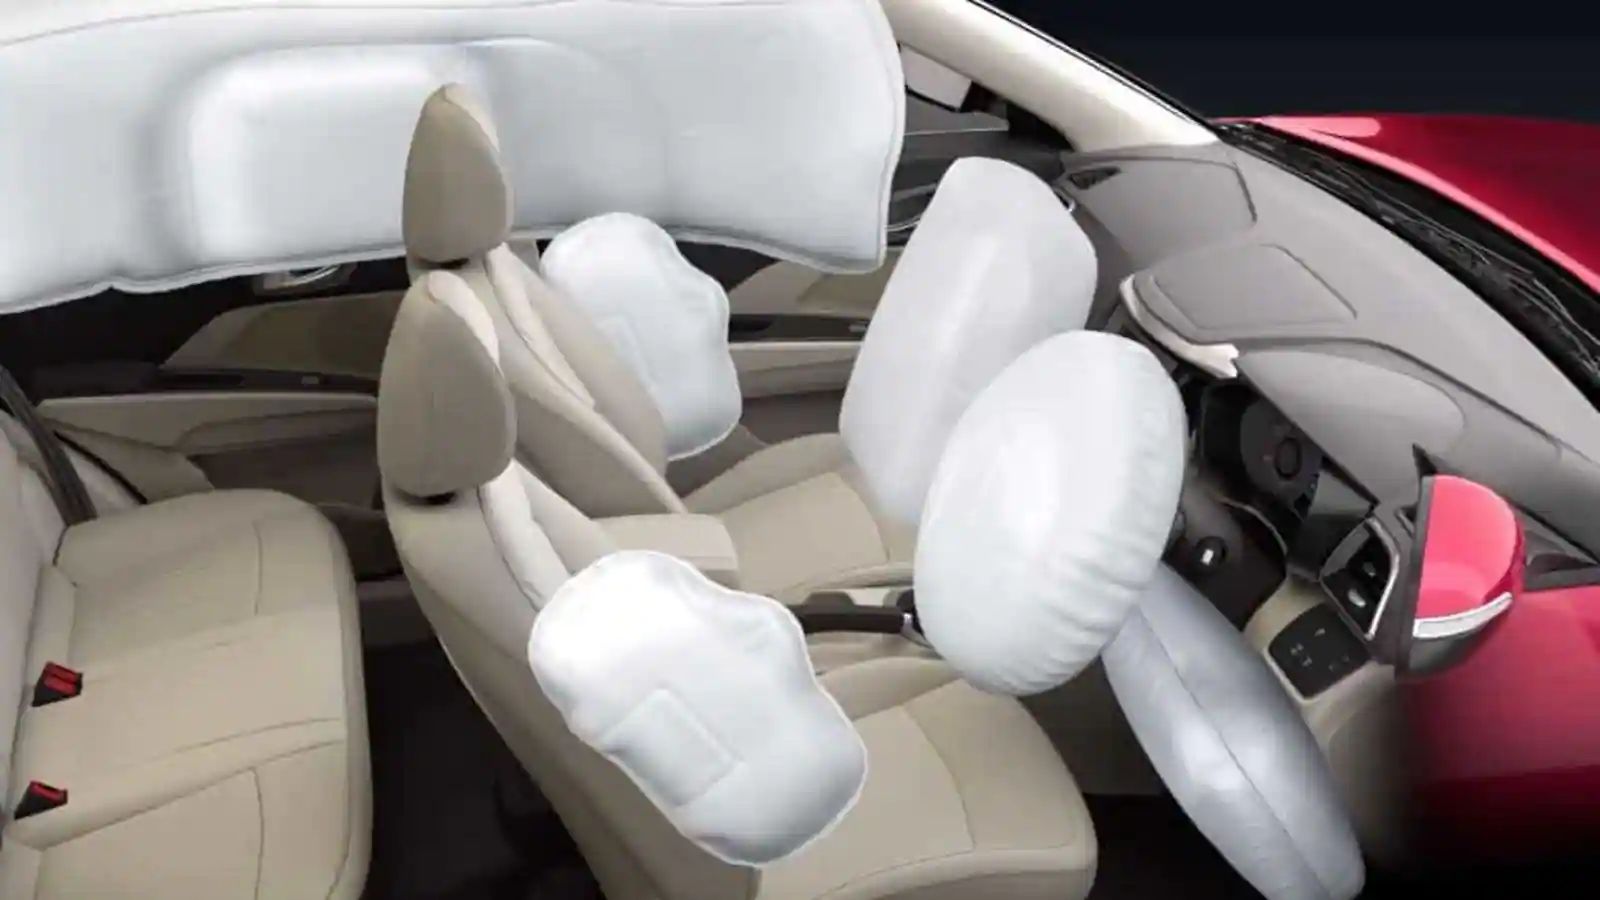 Working of airbags